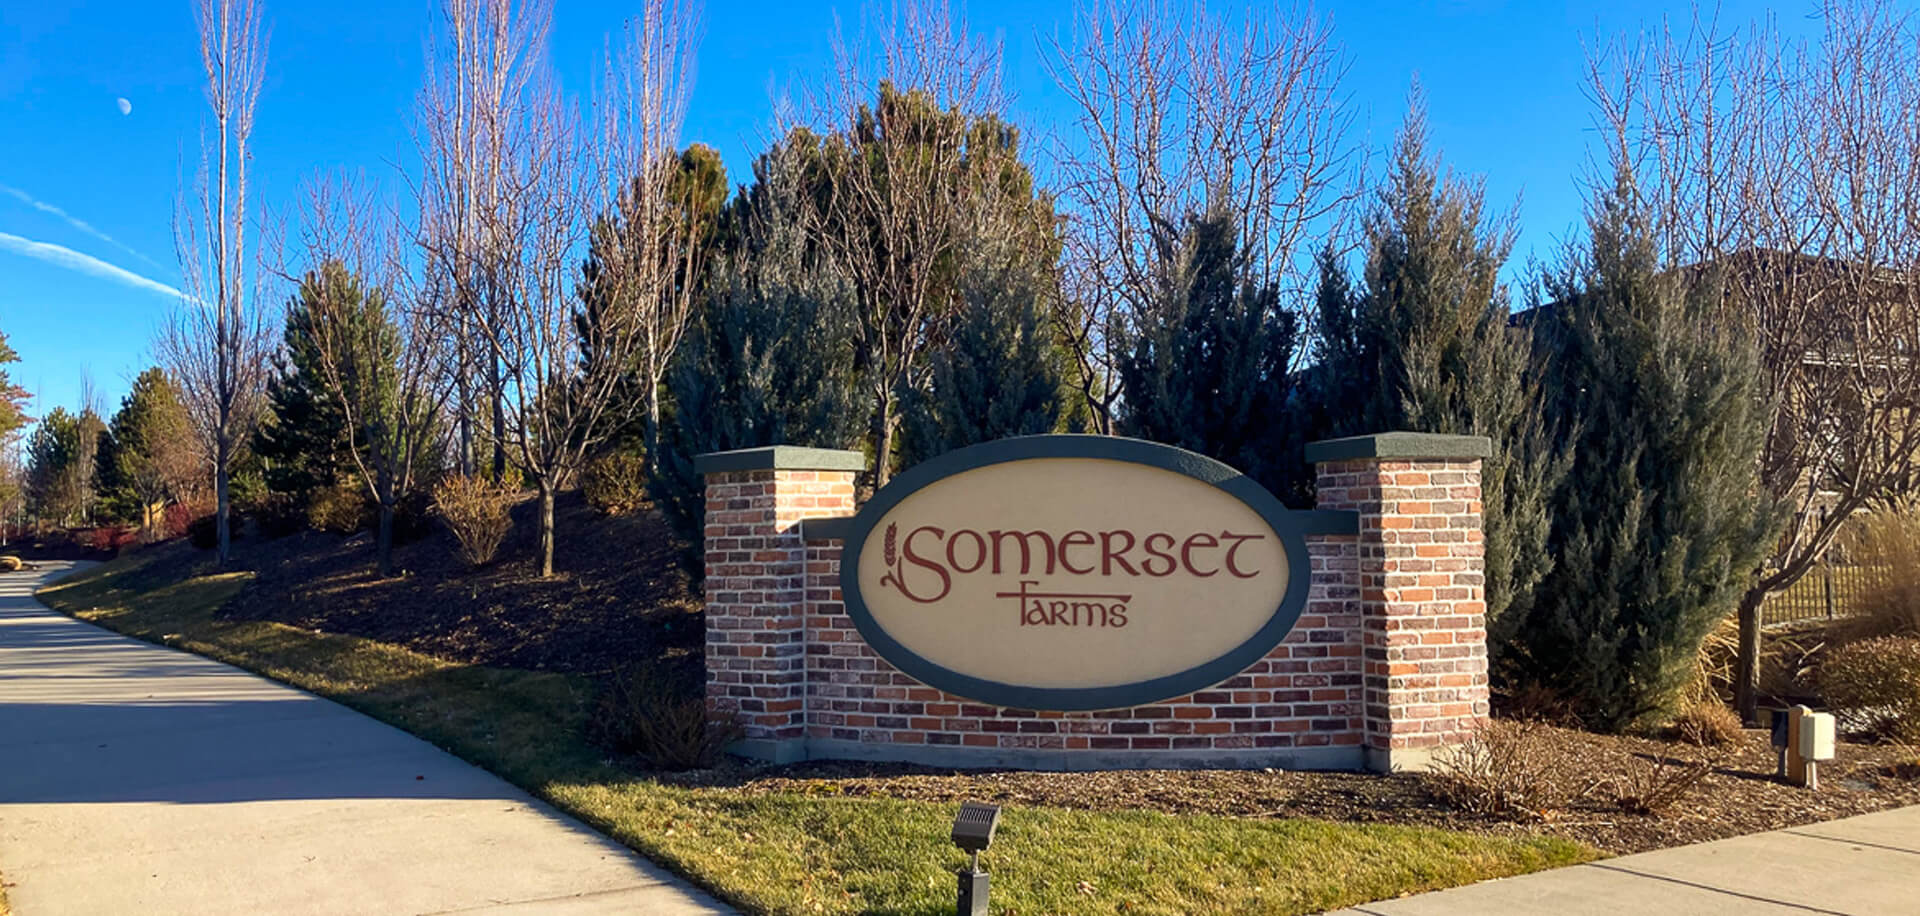 Somerset Farms Subdivision